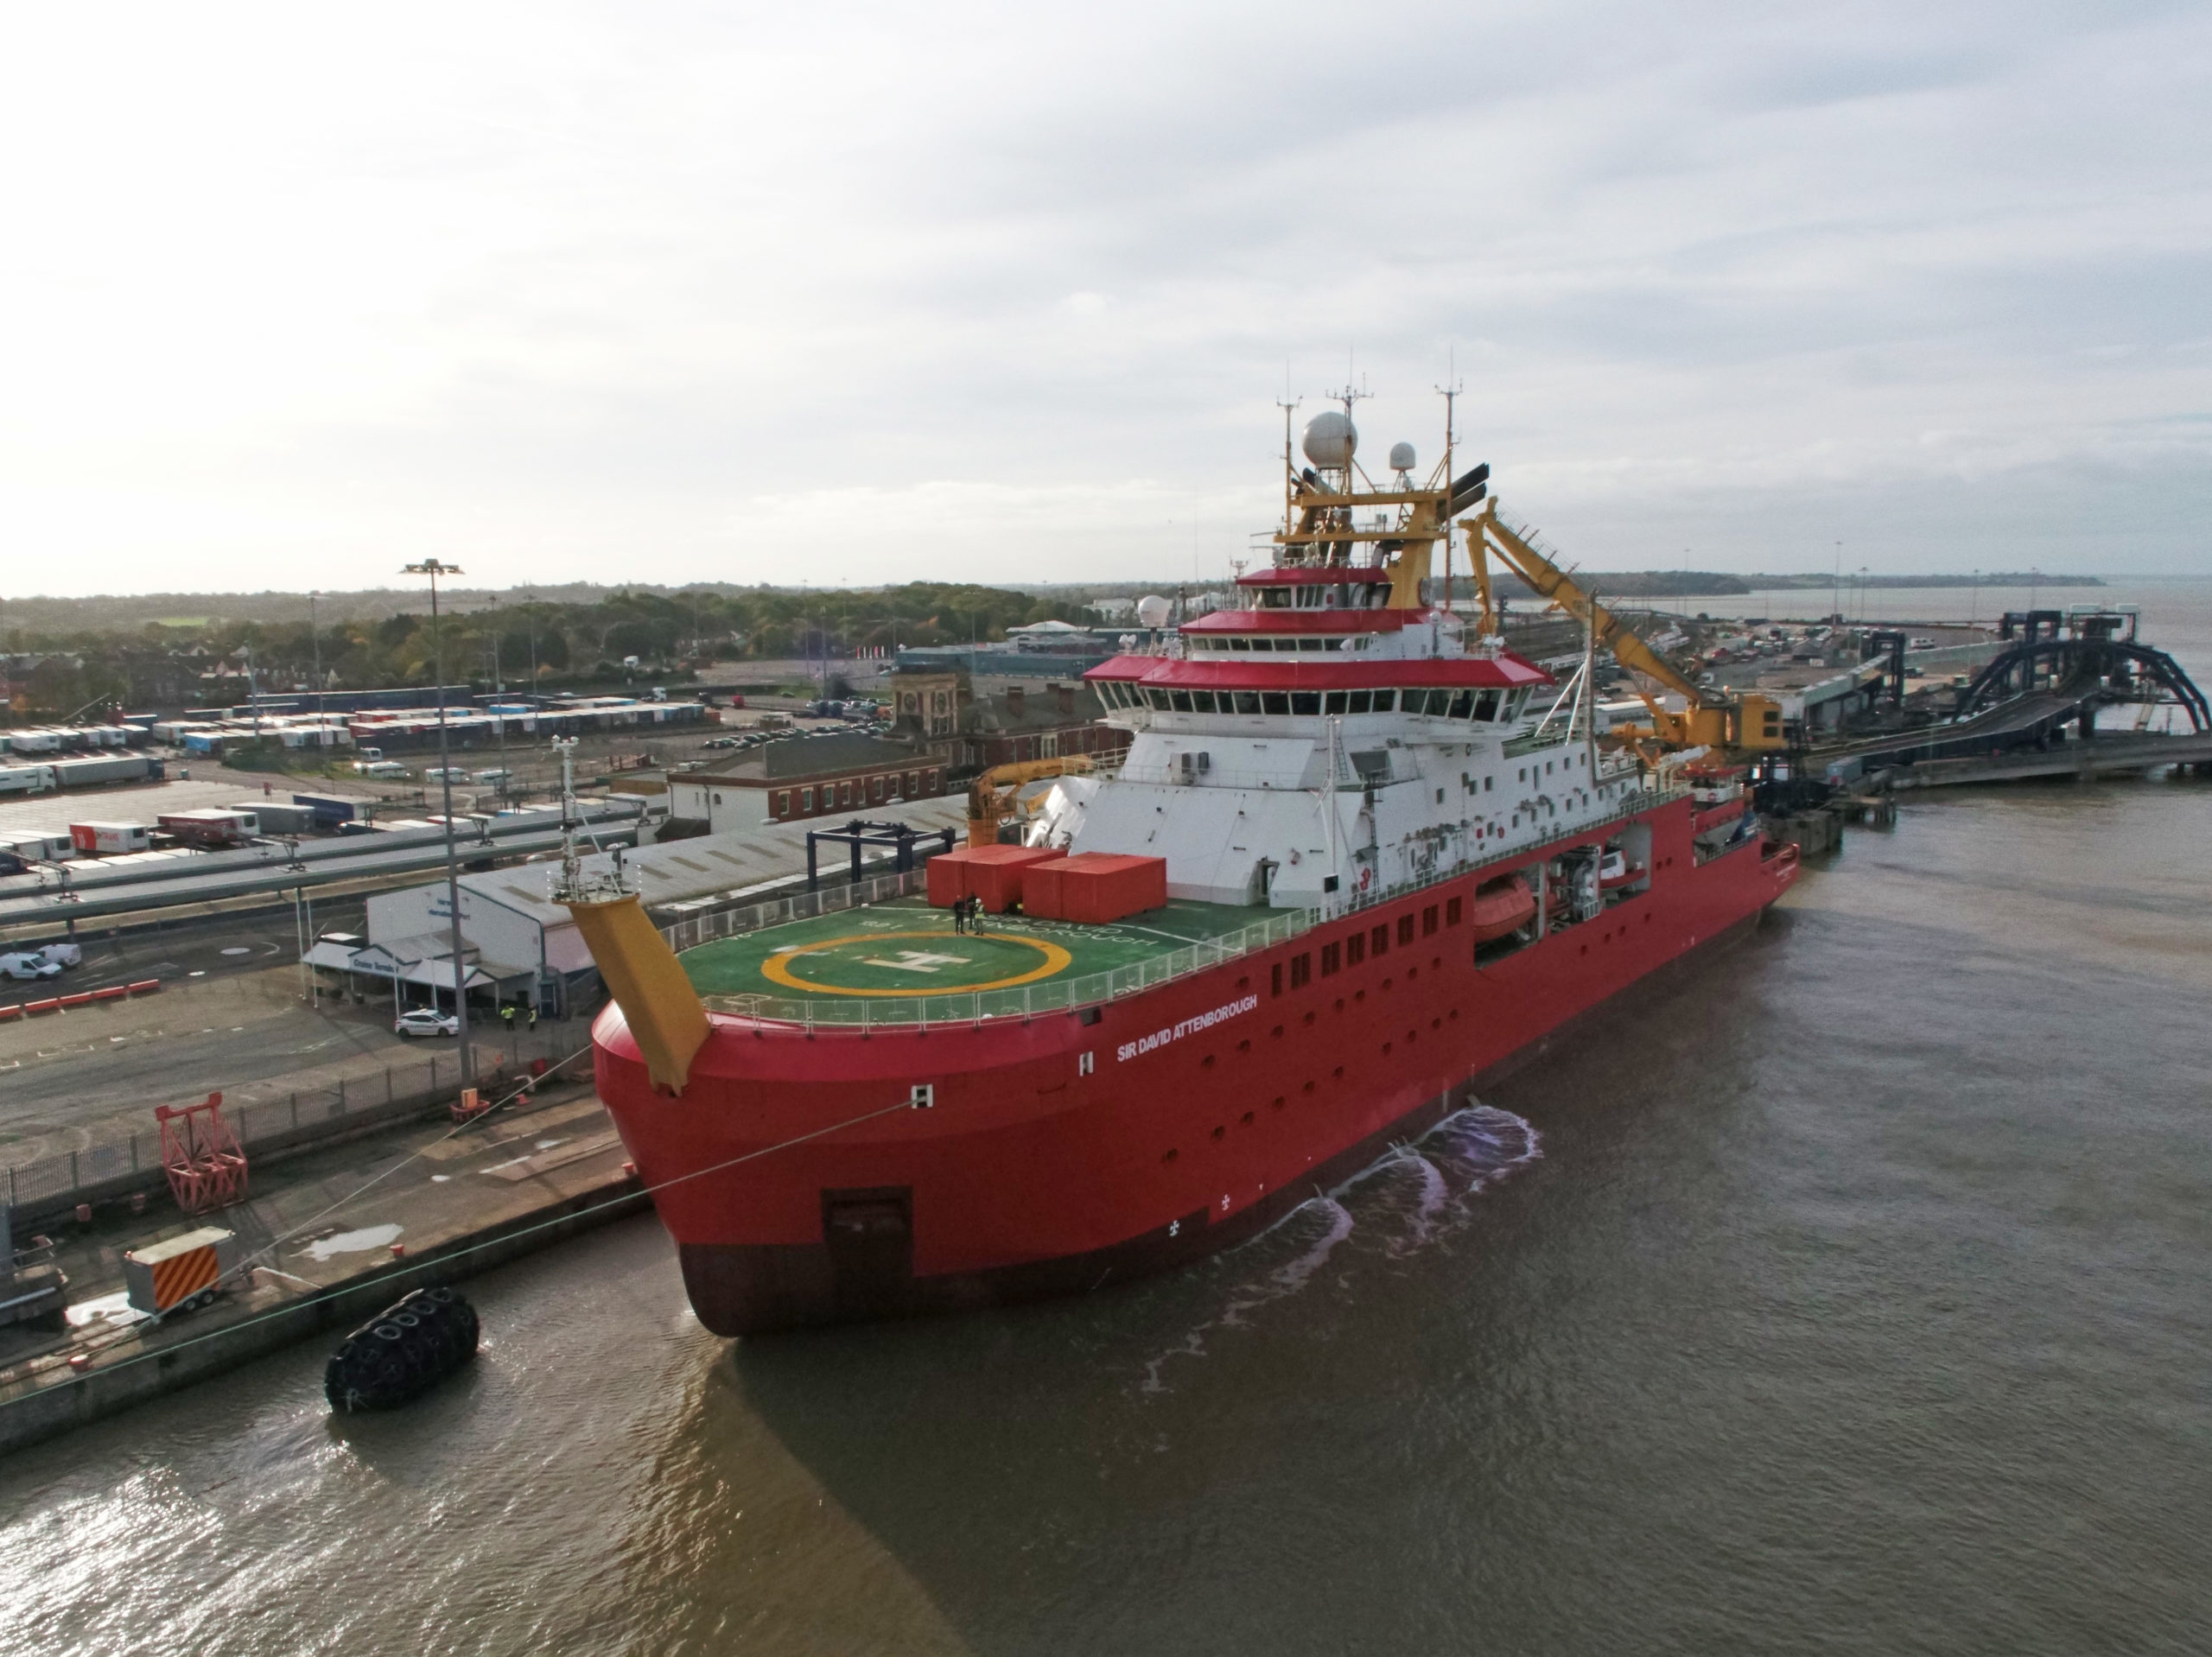 A picture of RRS Sir David Attenborough from the bow of the ship, next to the port. The ship is red and there is a green helideck visible, with a large white letter H on it. There are two large red containers on the deck. The superstructure is white, and you can see the ship's biggest crane which is yellow.